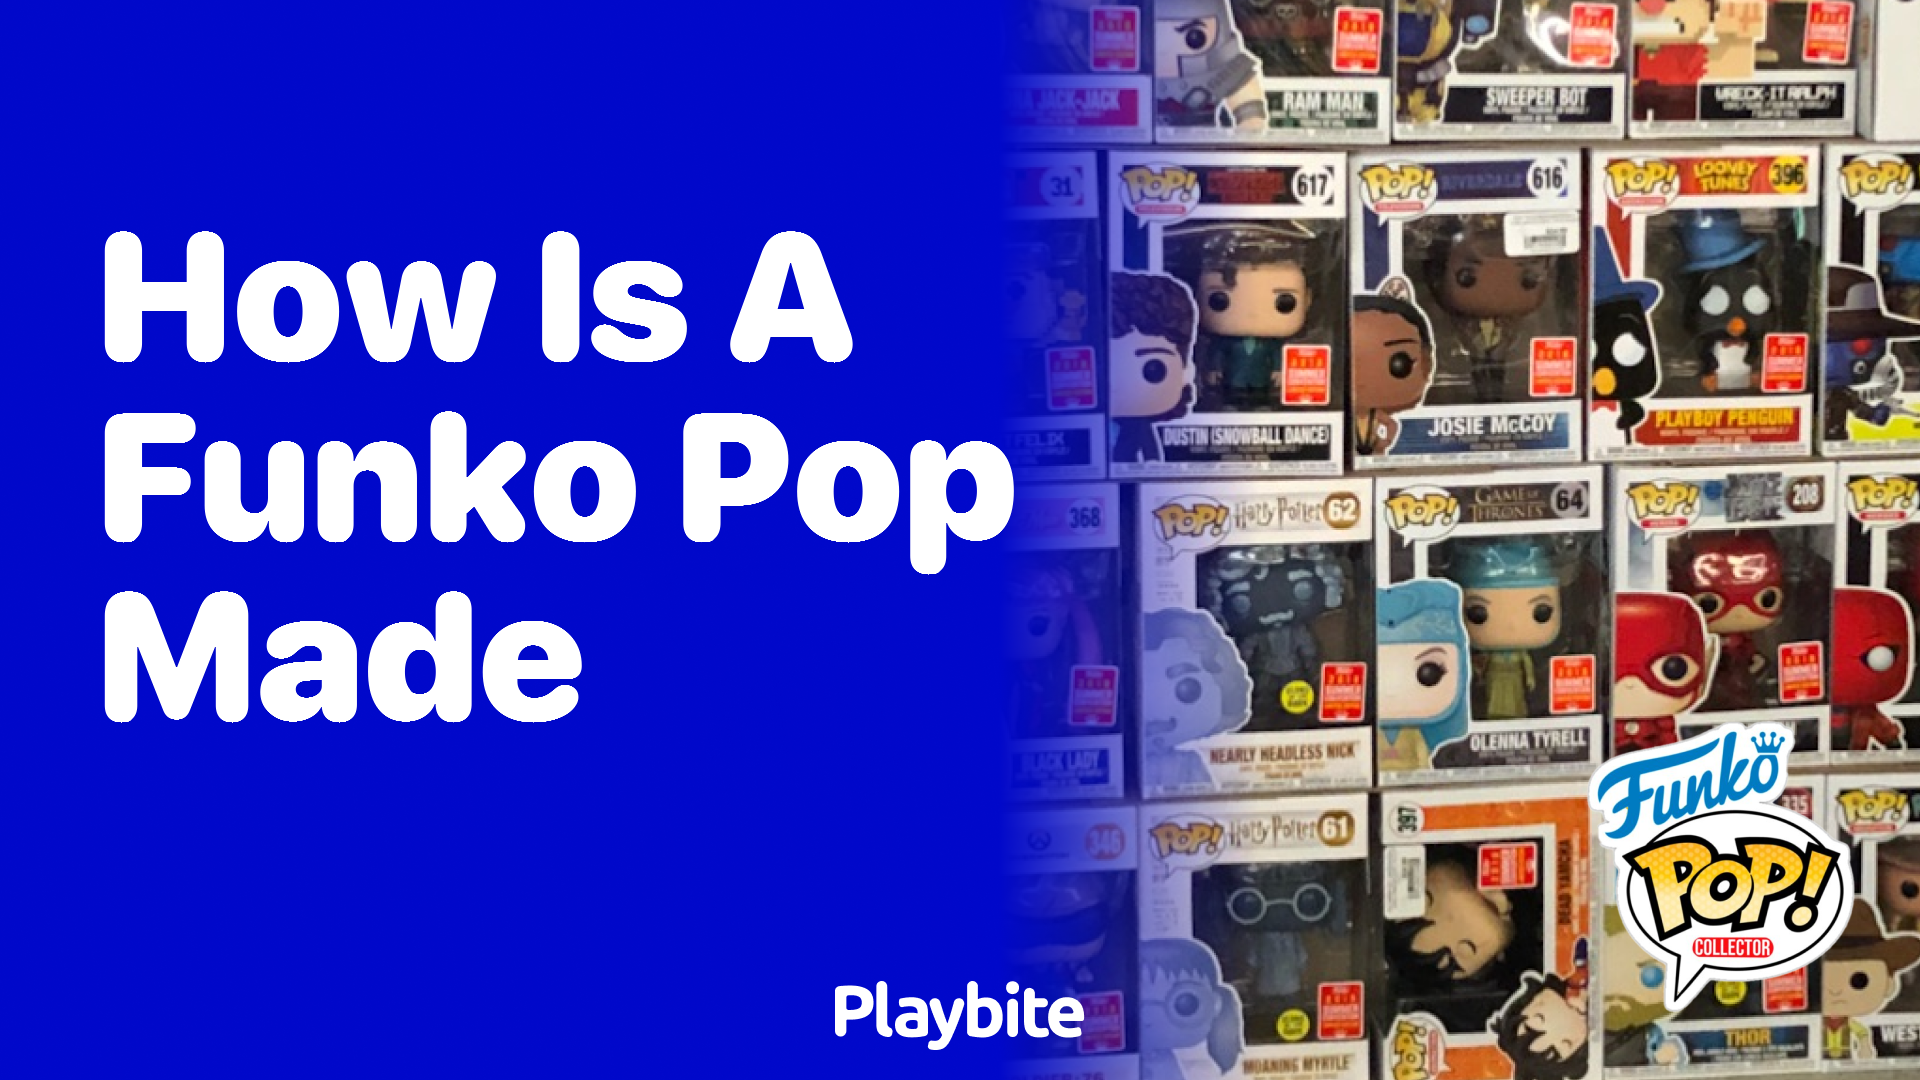 How is a Funko Pop Made?